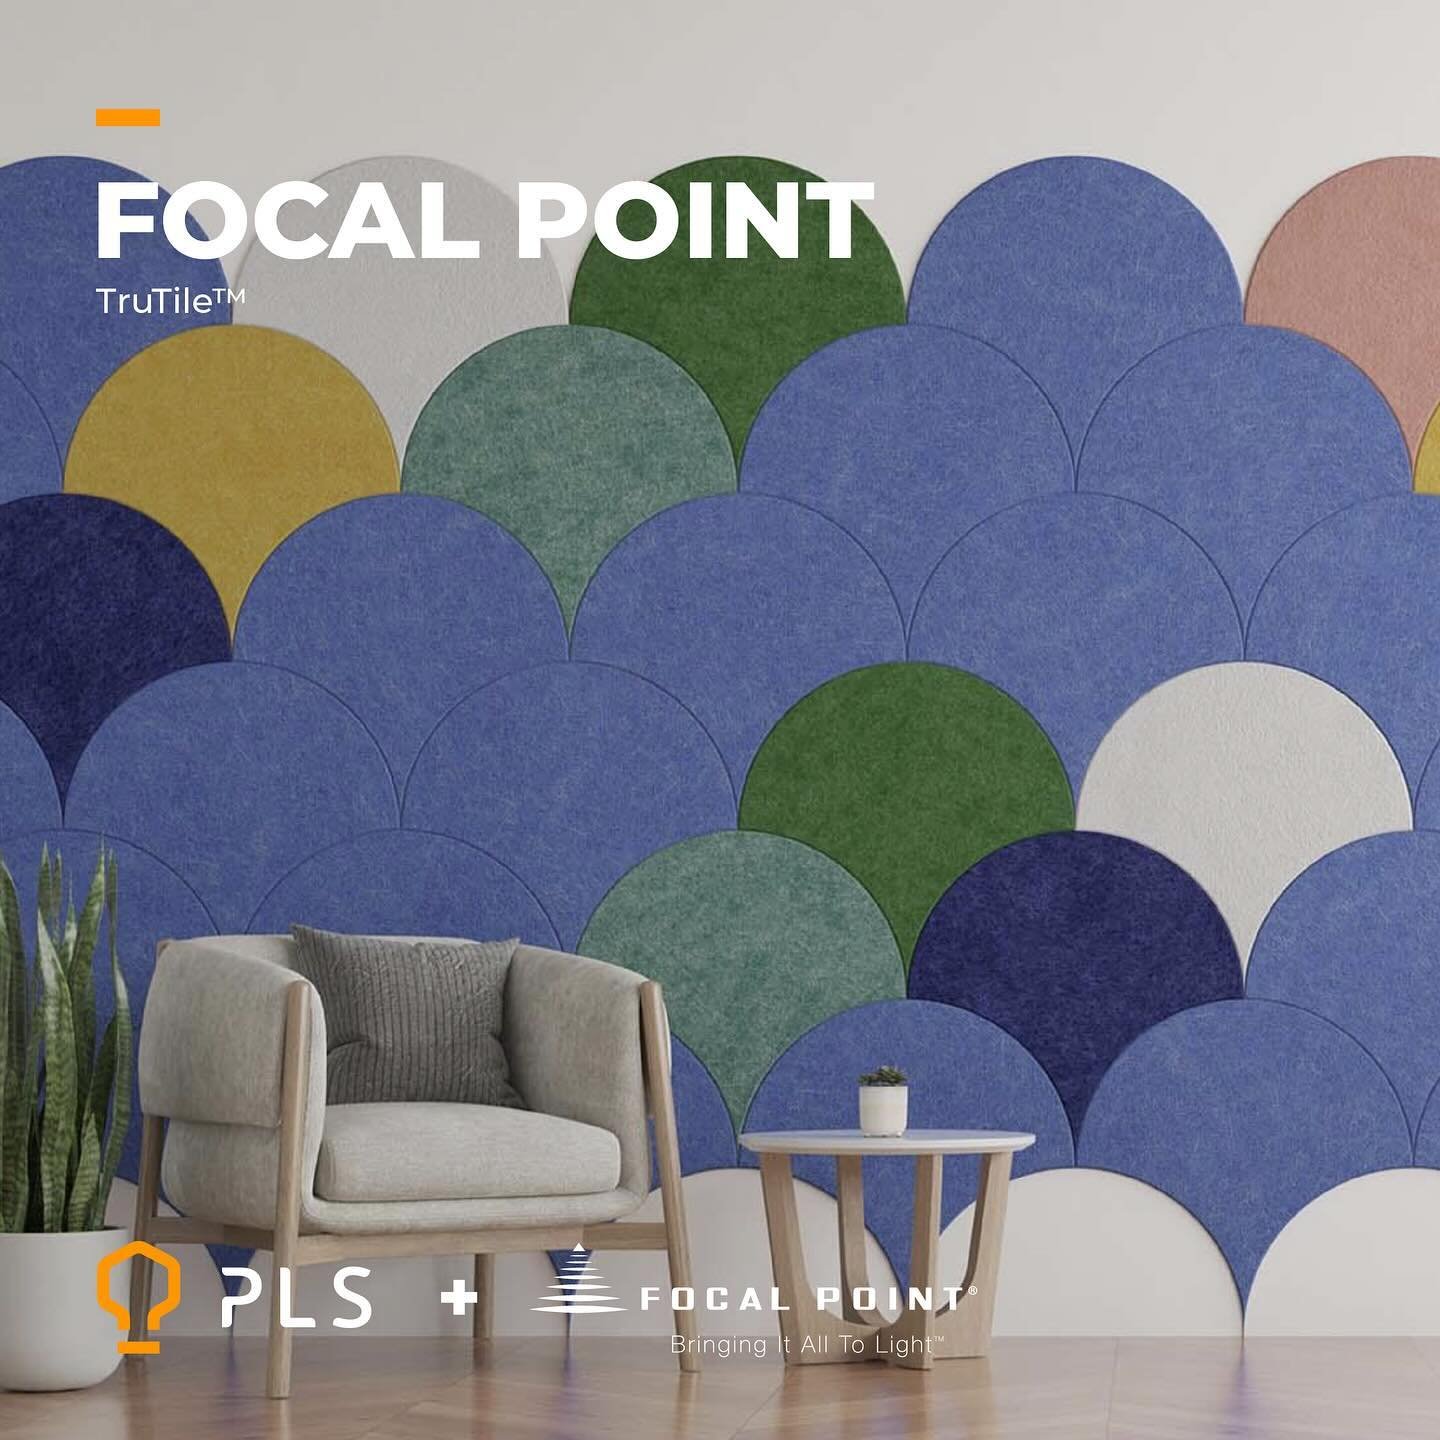 FOCAL POINT |  TruTile&trade;

Easily transition from ceiling to walls with TruTile&trade; wall tiles
TruTile offers a flexible solution to transform walls that coordinates with lit and unlit, ceiling mount acoustic solutions. Mix and match TruTile D